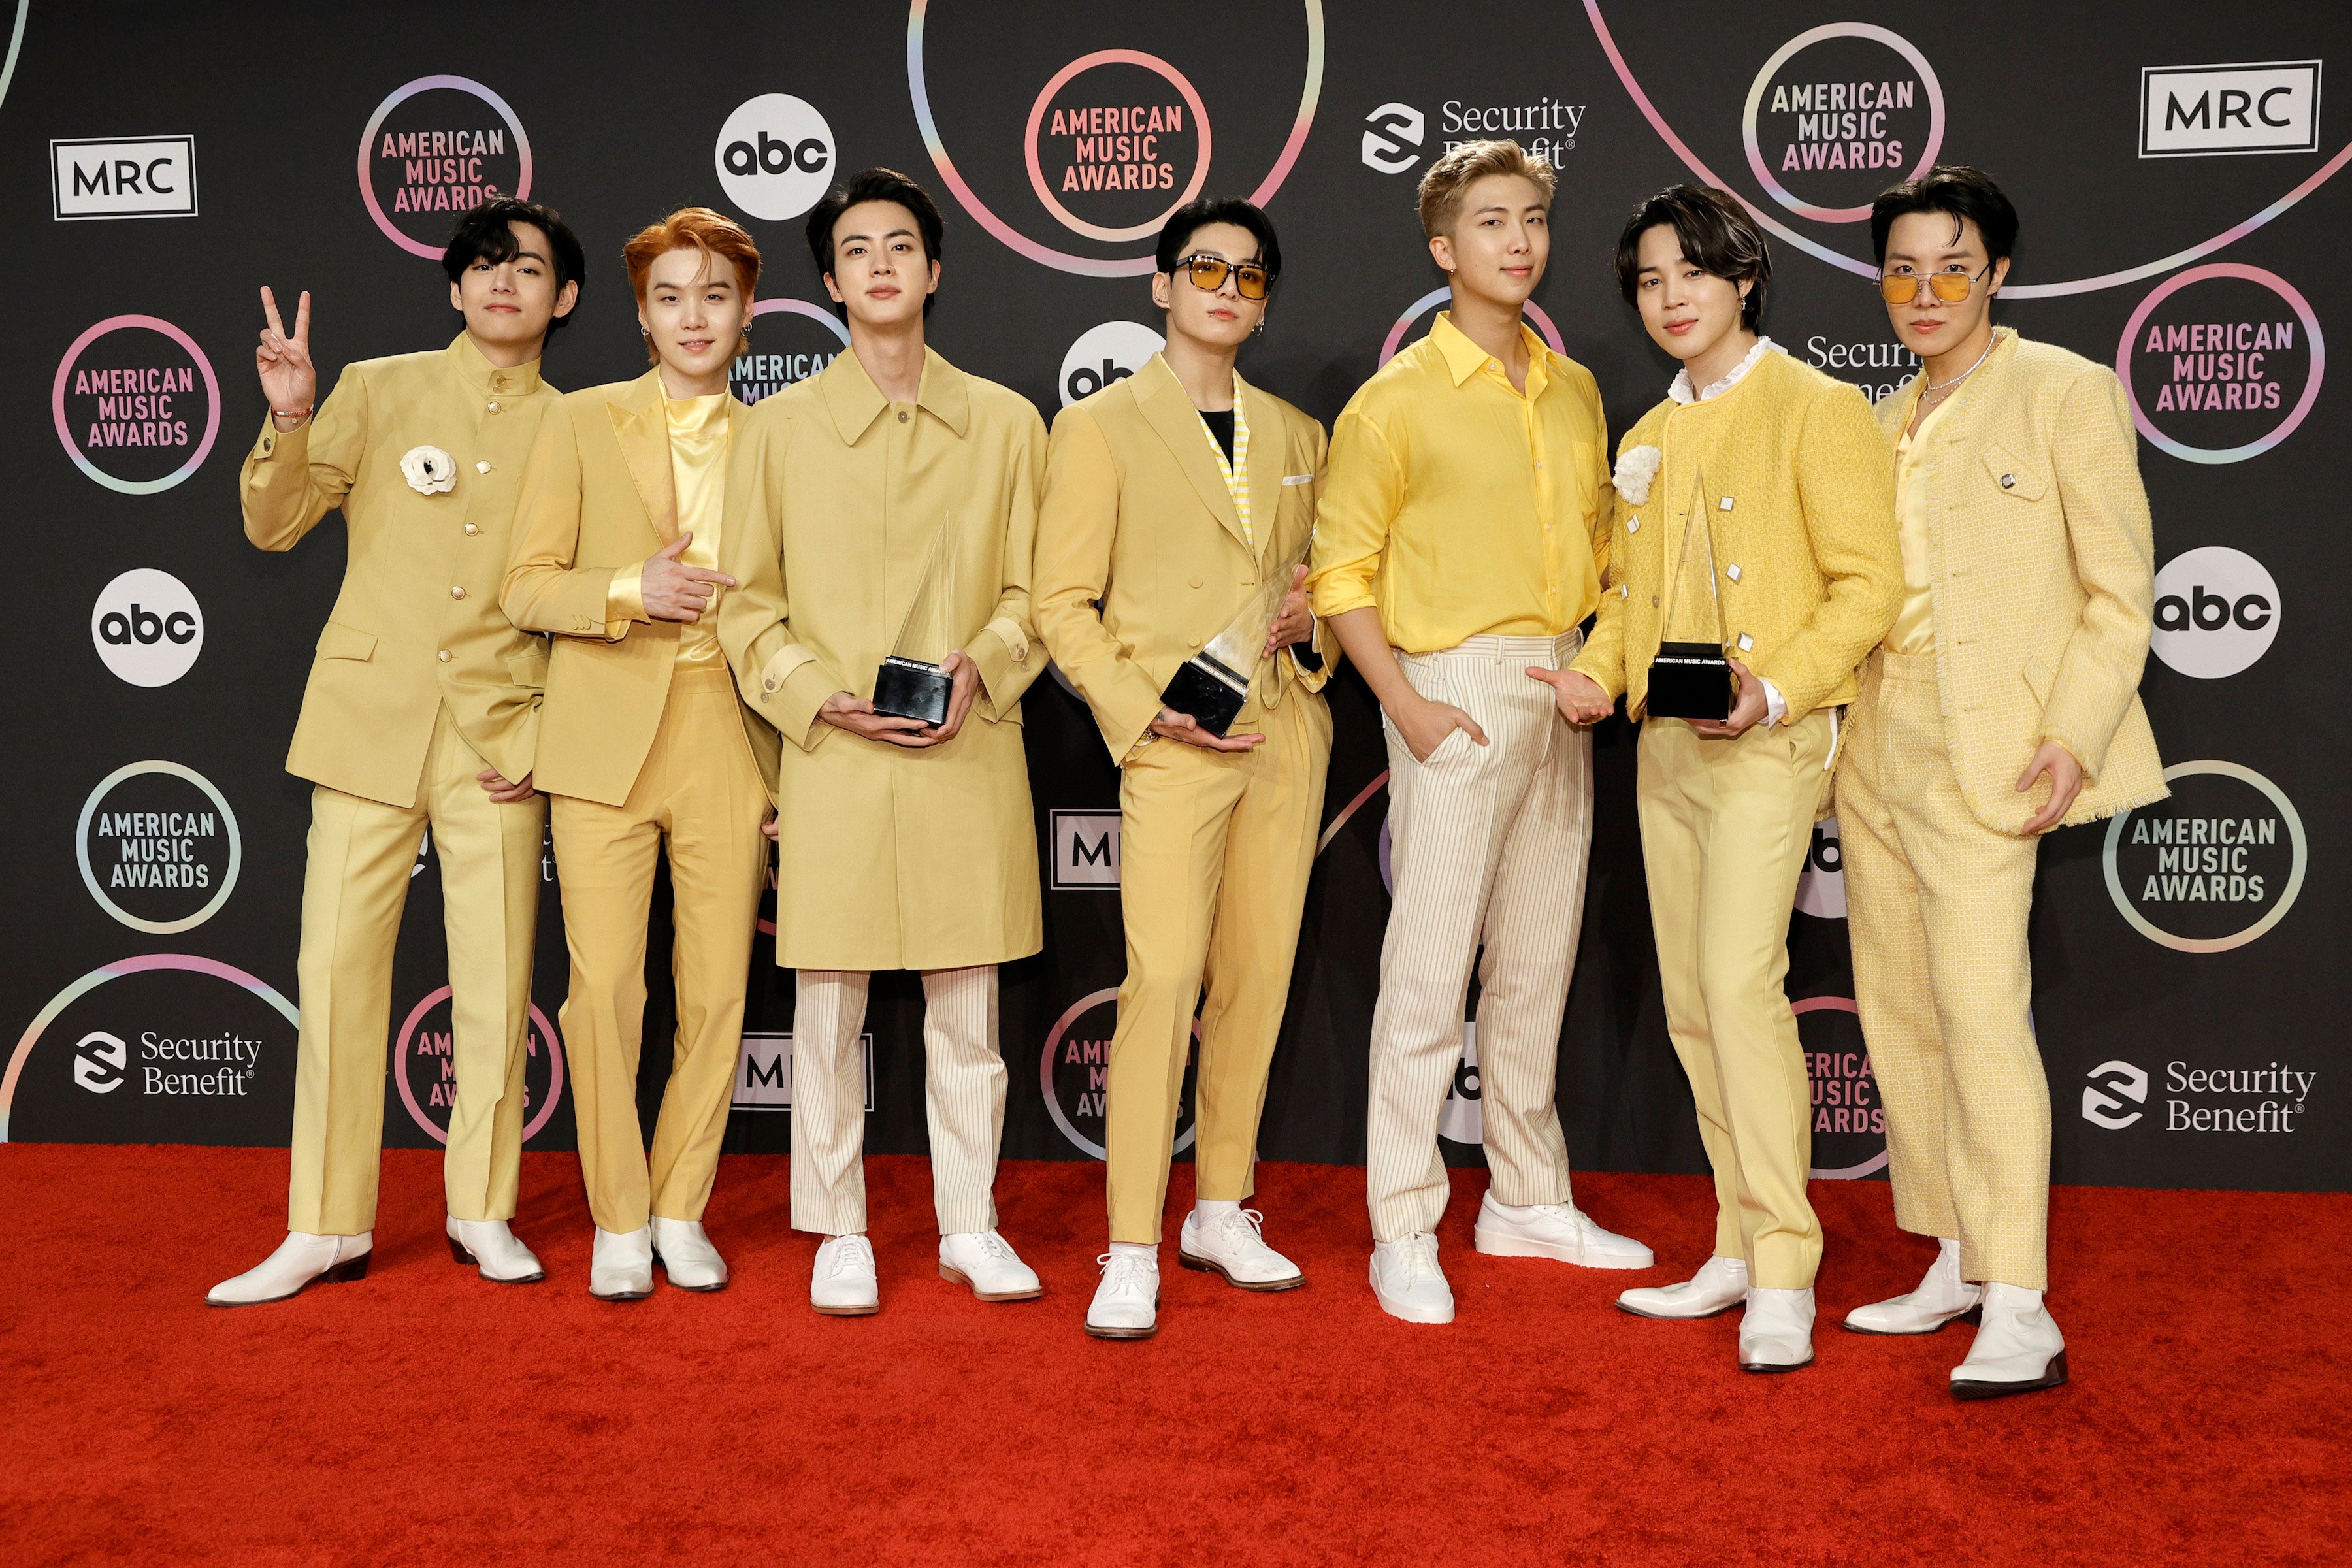 V, Suga, Jin, Jungkook, RM, Jimin, and J-Hope of BTS, winners of the Favorite Pop Song, Favorite Pop Duo or Group, and Artist of the Year American Music Awards